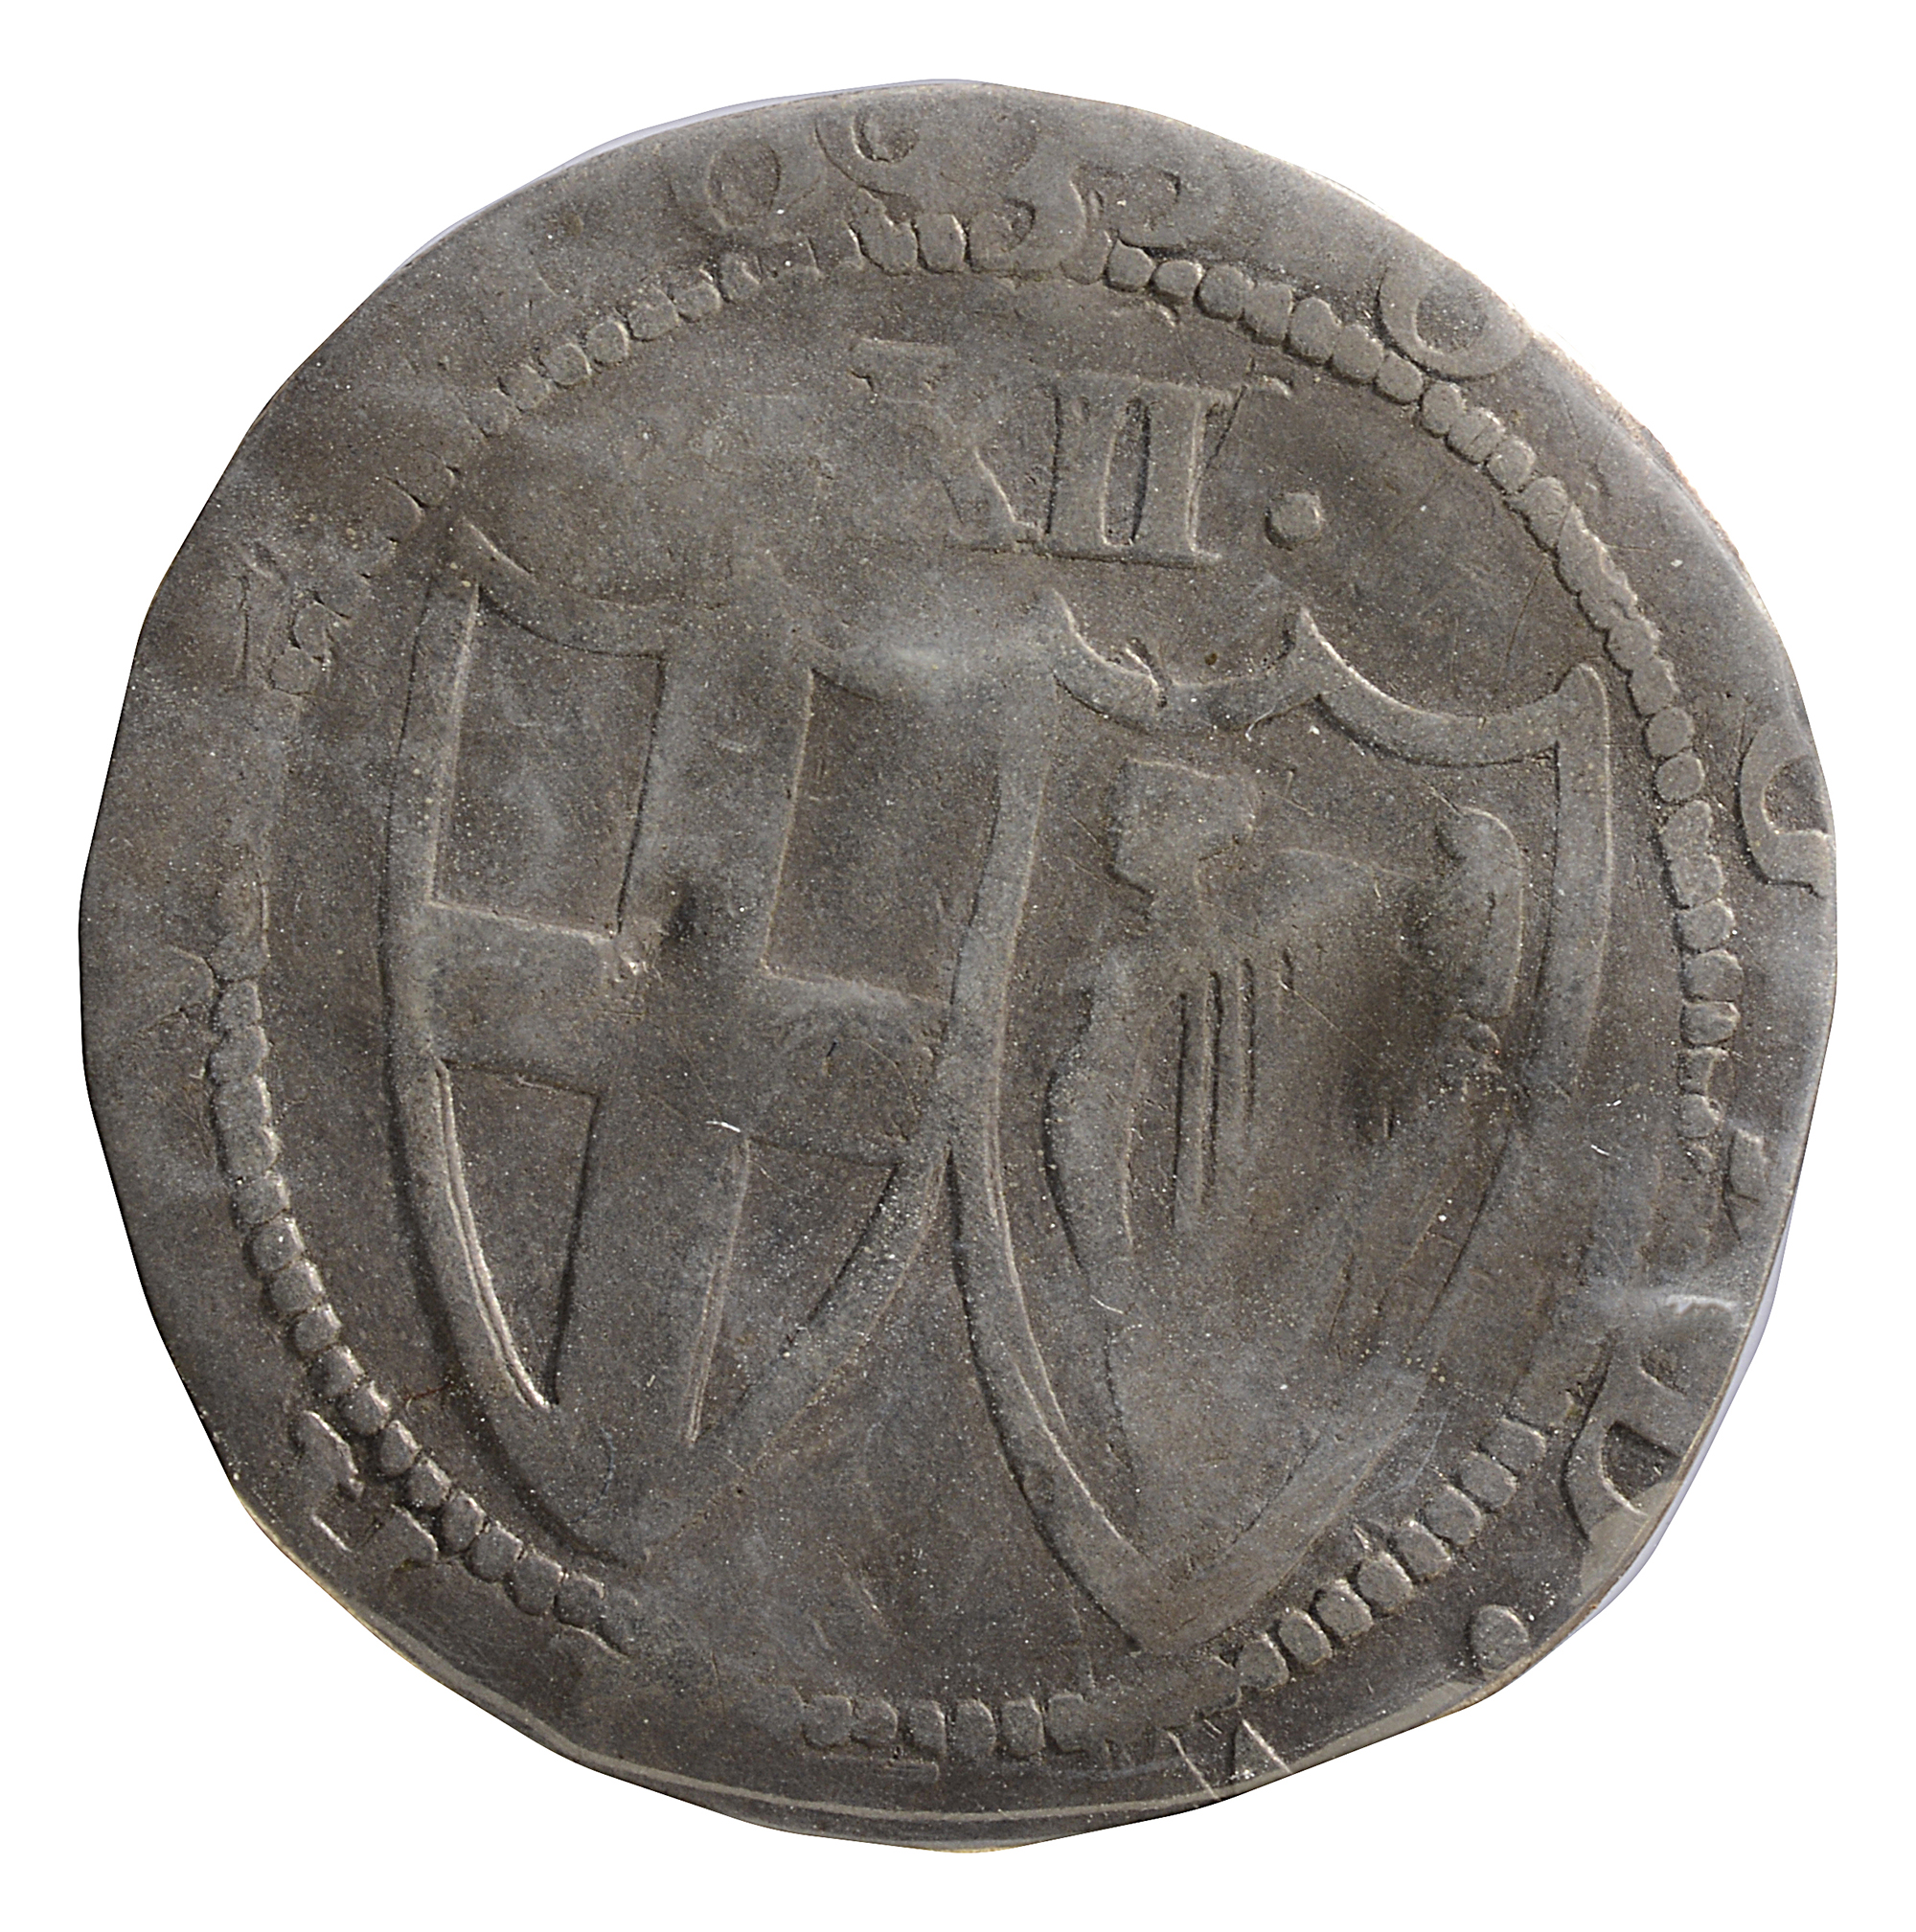 Commonwealth Silver Shilling1652.THE COMMONWEALTH OF ENGLAND, Shield of St. George in wreath of palm